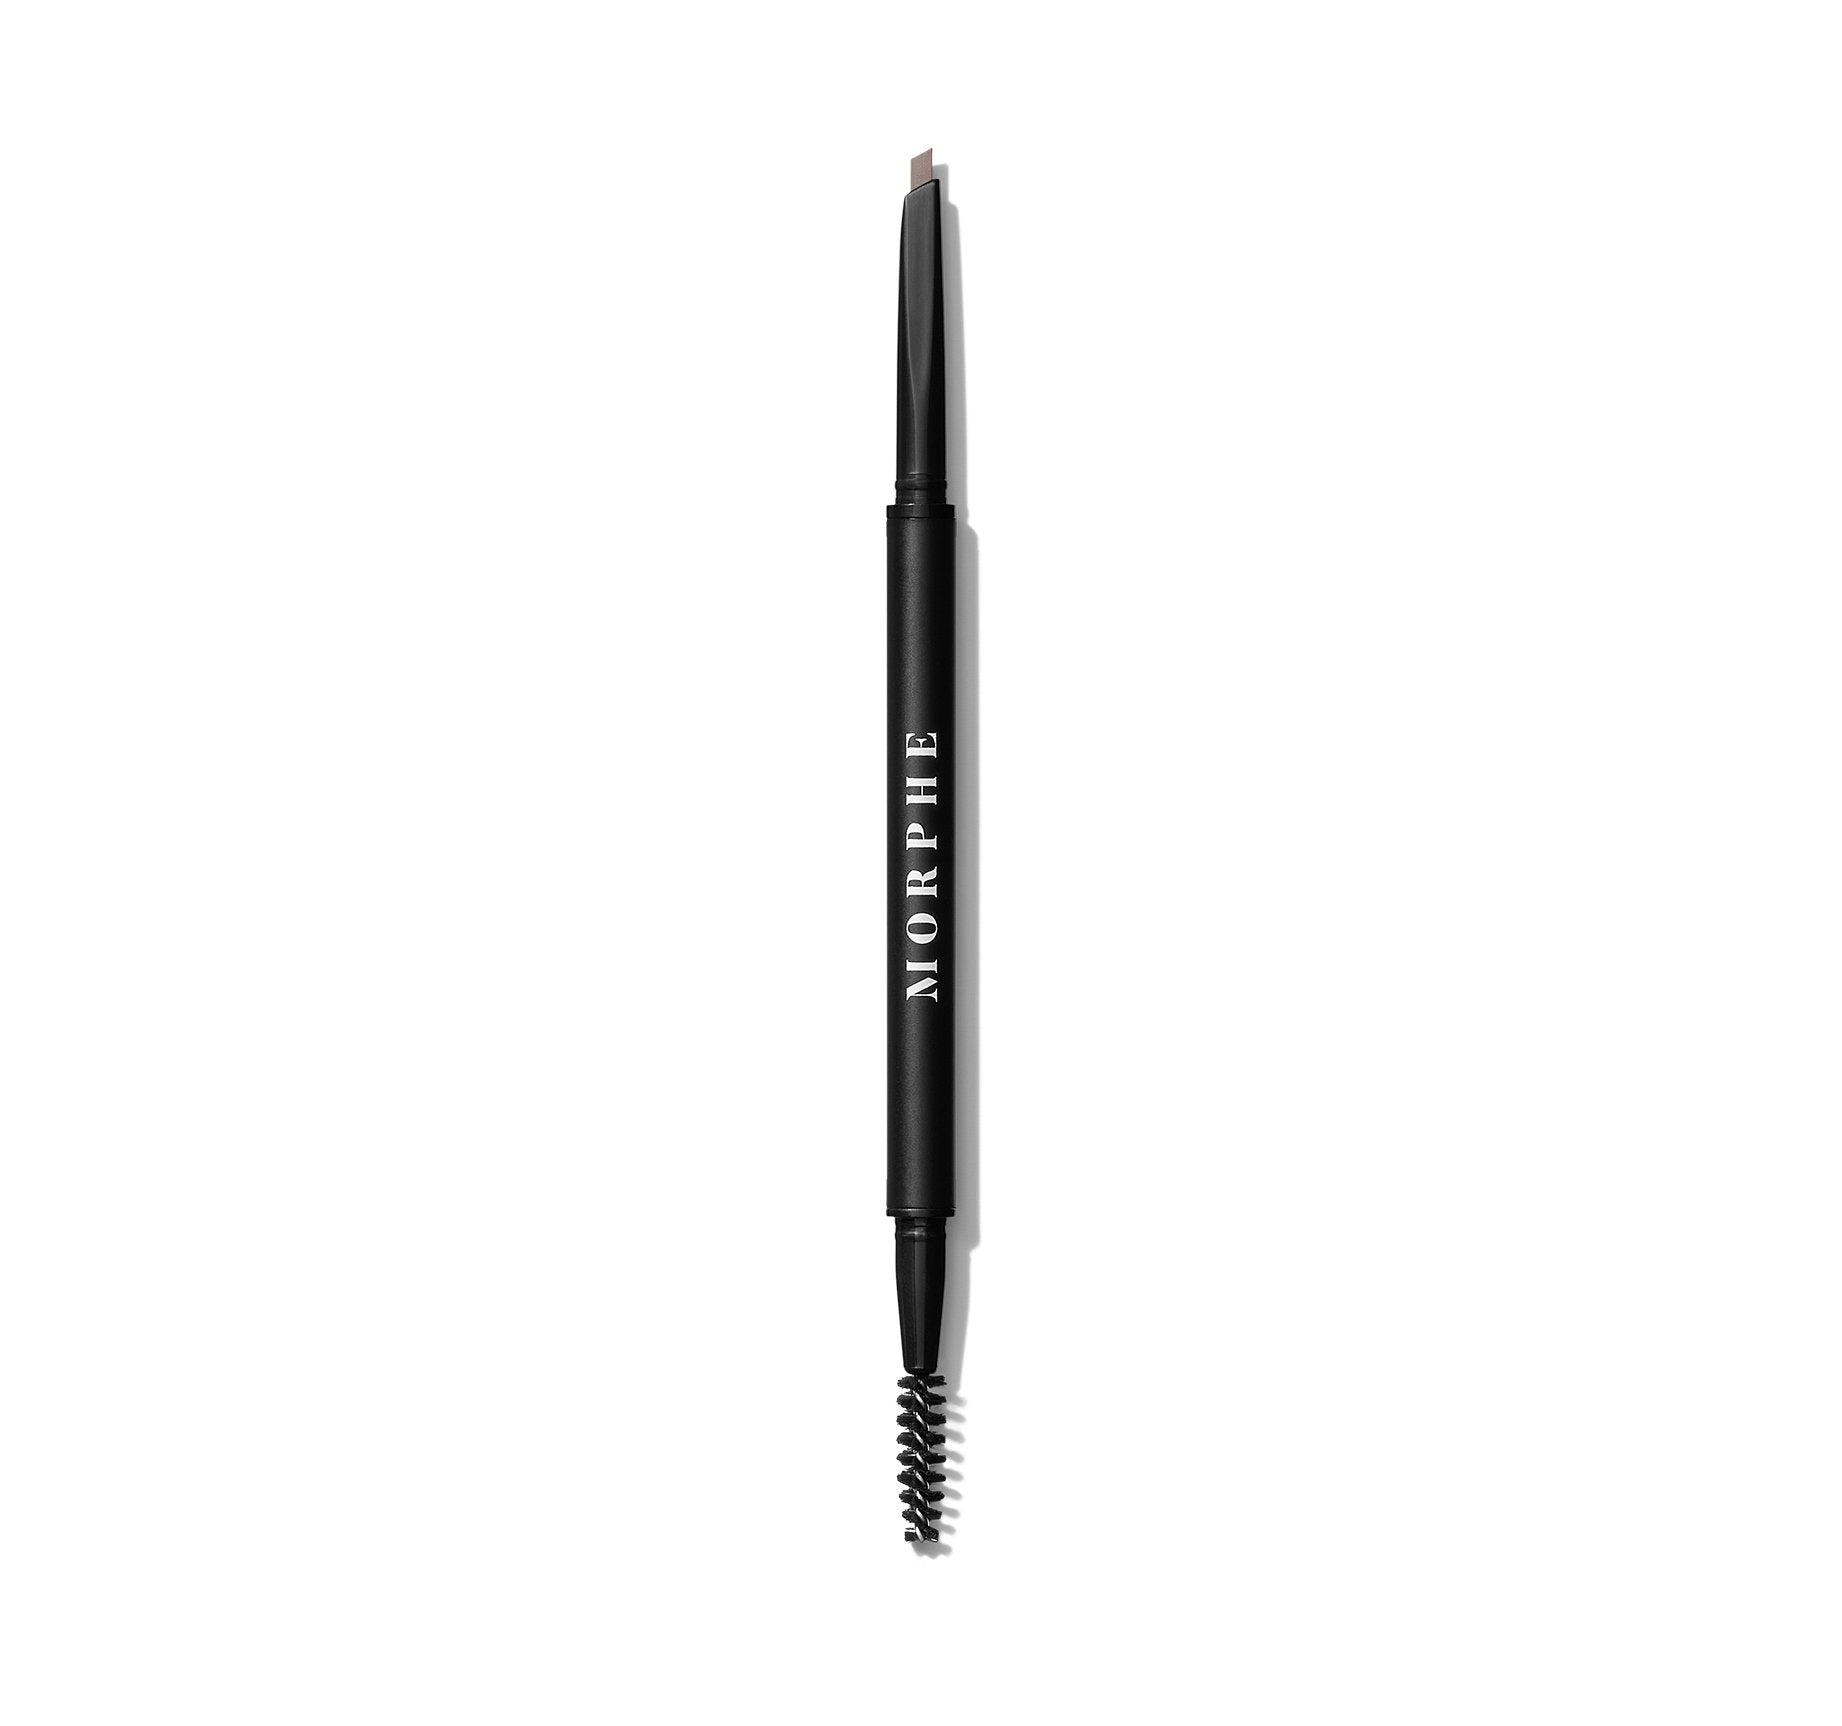 Definer Dual-Ended Brow Pencil & Spoolie - Cold Brew - Image 1